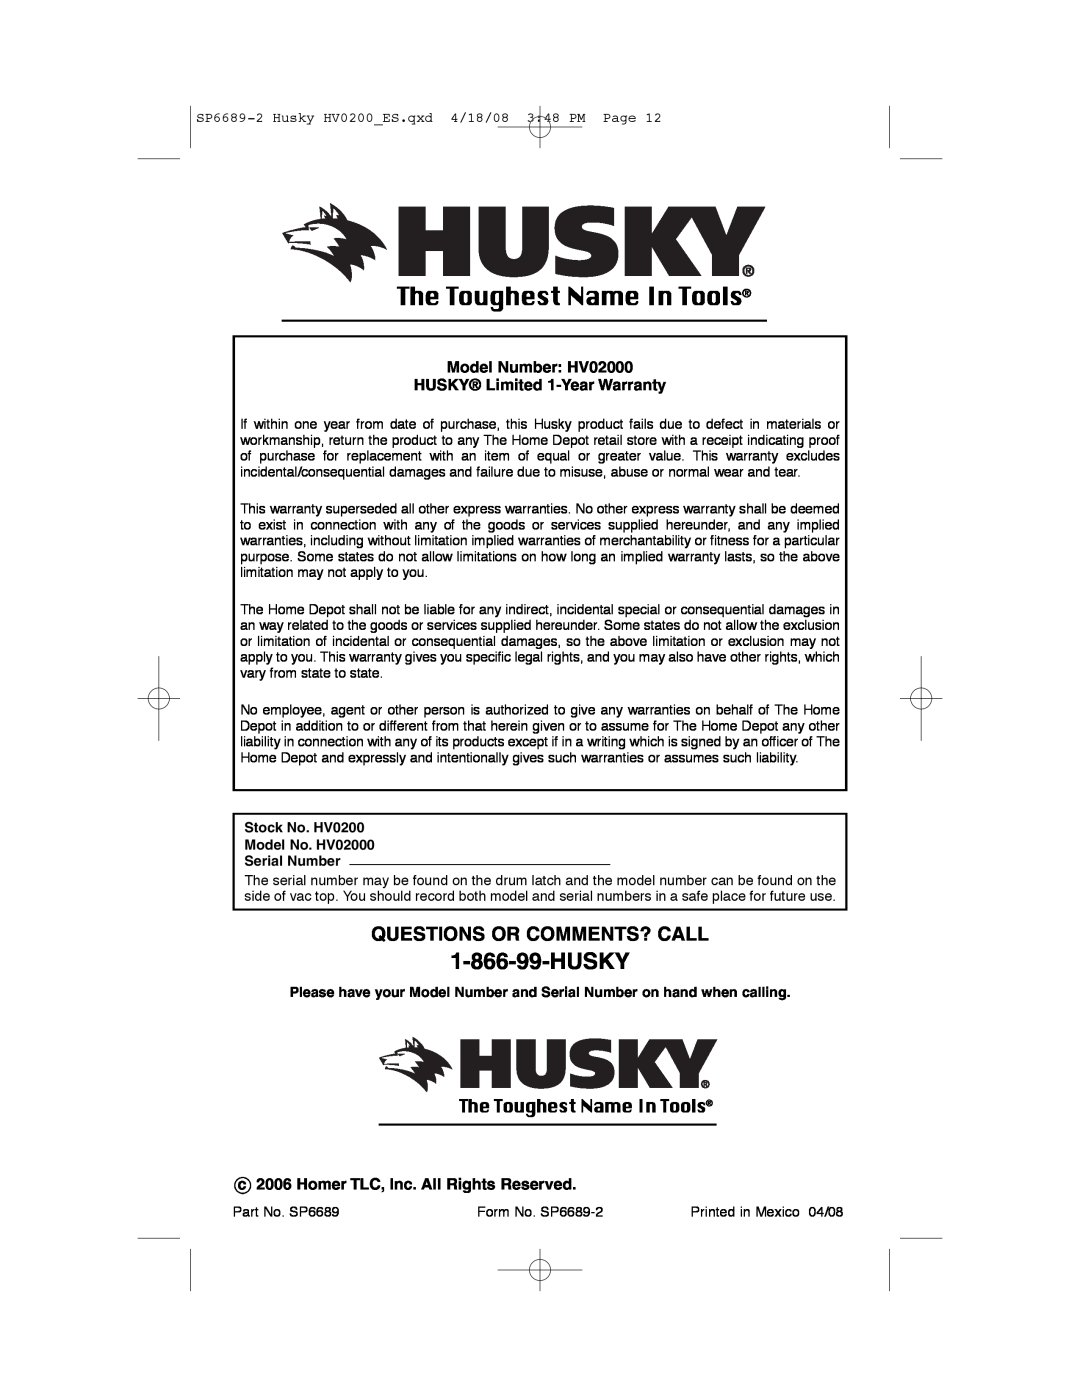 Husky HV02000 manual Husky, Questions Or Comments? Call, The Toughest Name In Tools 